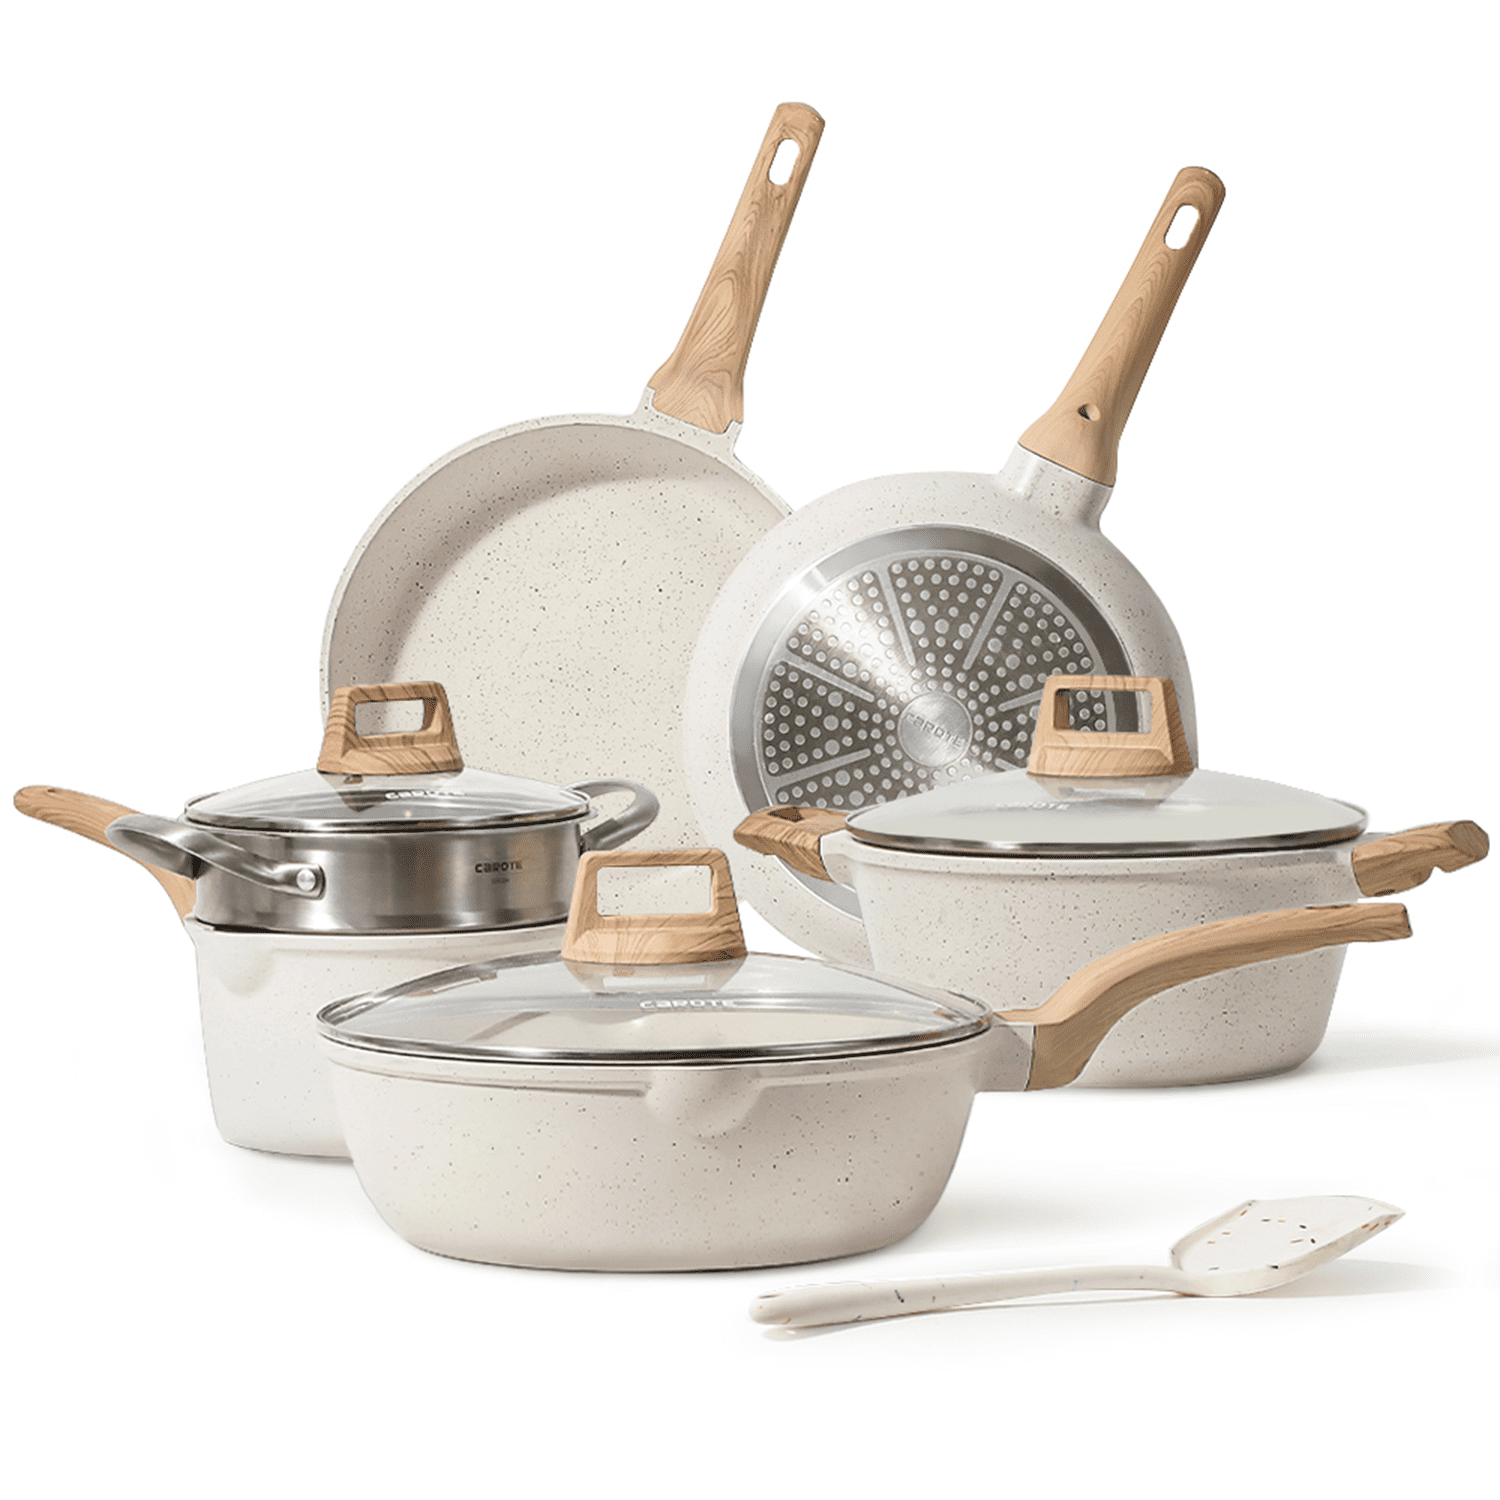 the oatmeal speckled cookware set